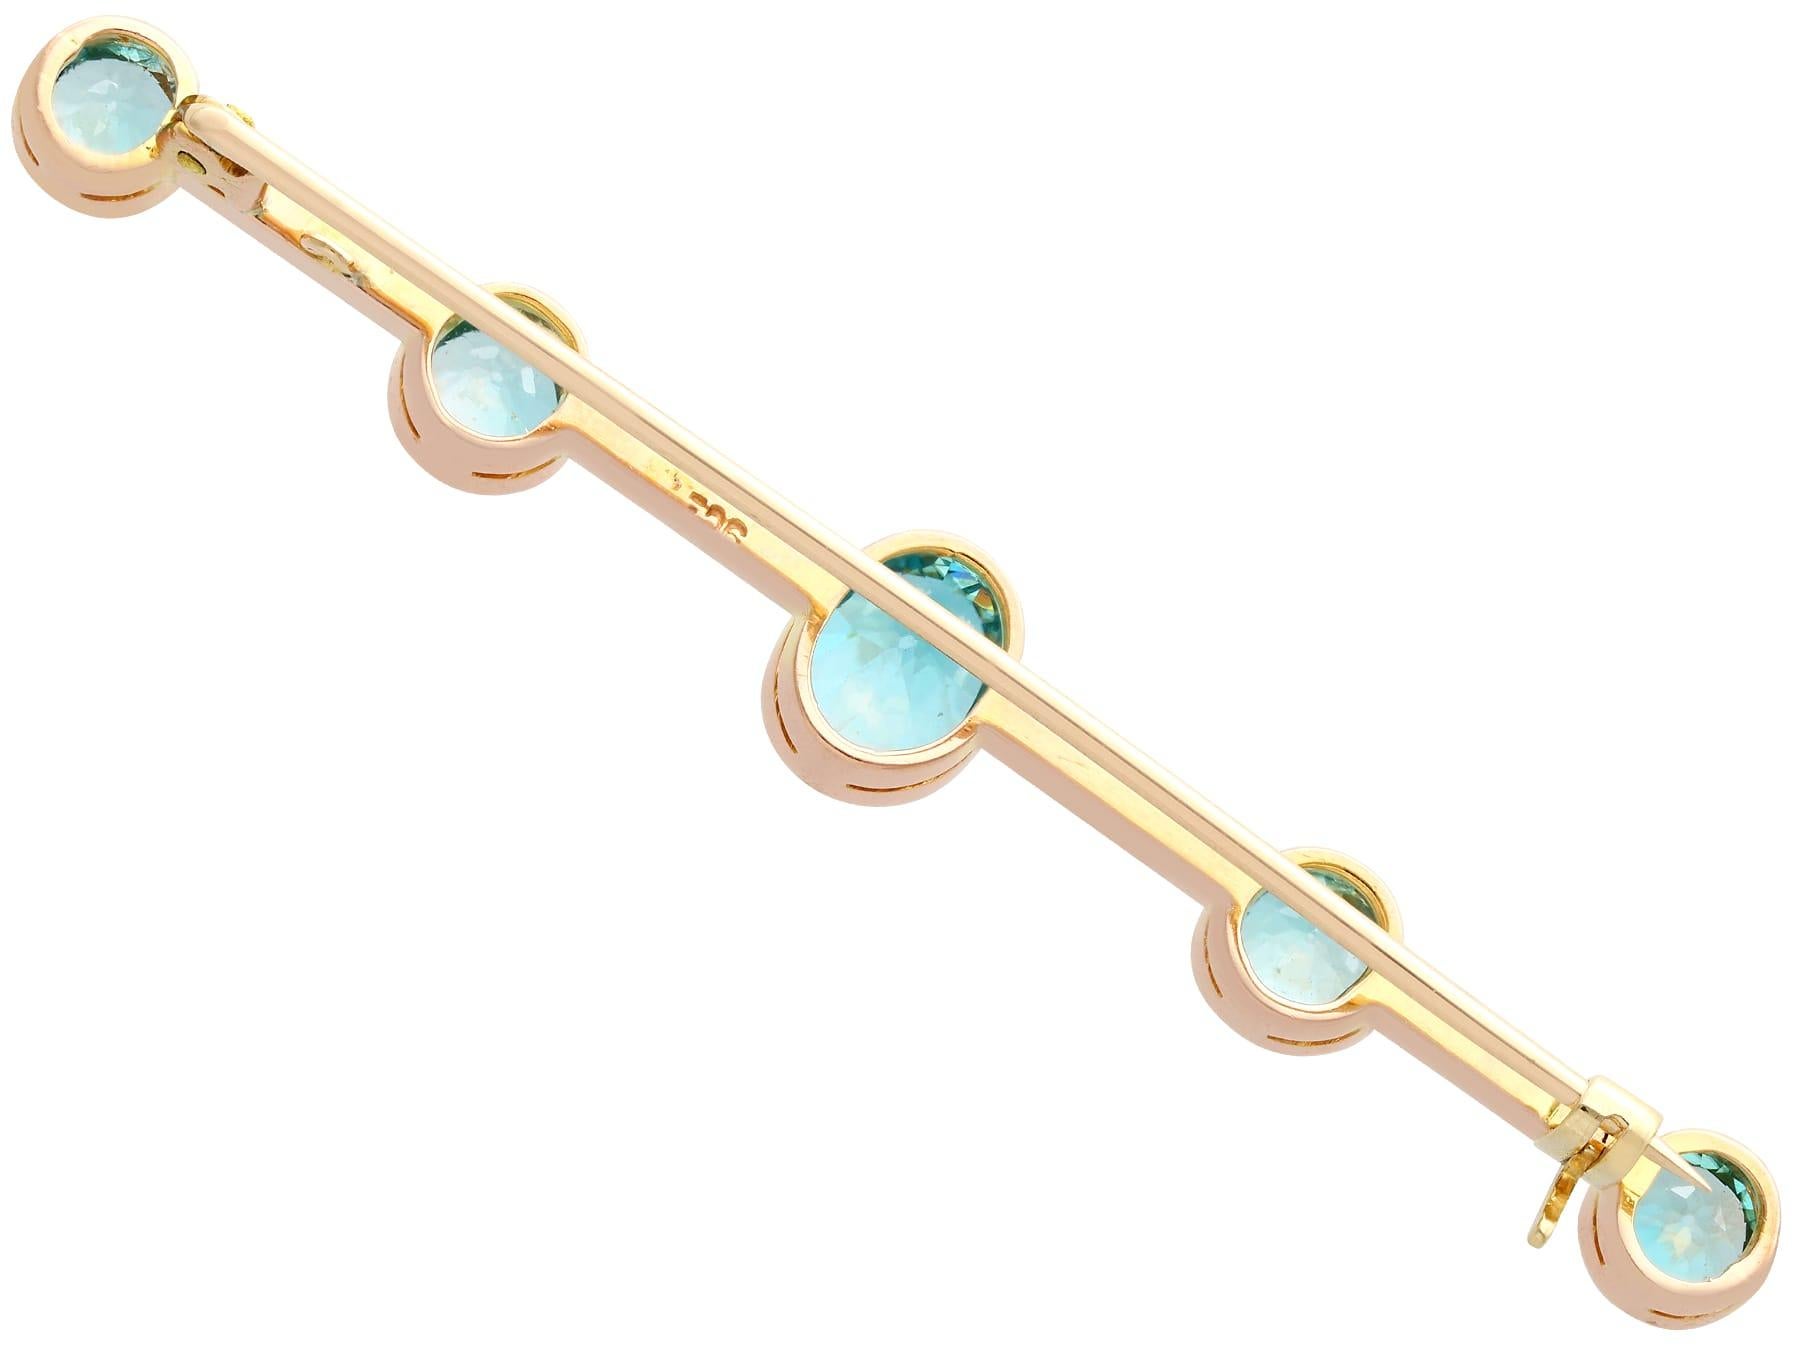 Antique 5.46 Carat Oval Cut High Zircon and Yellow Gold Bar Brooch, Circa 1900 For Sale 1